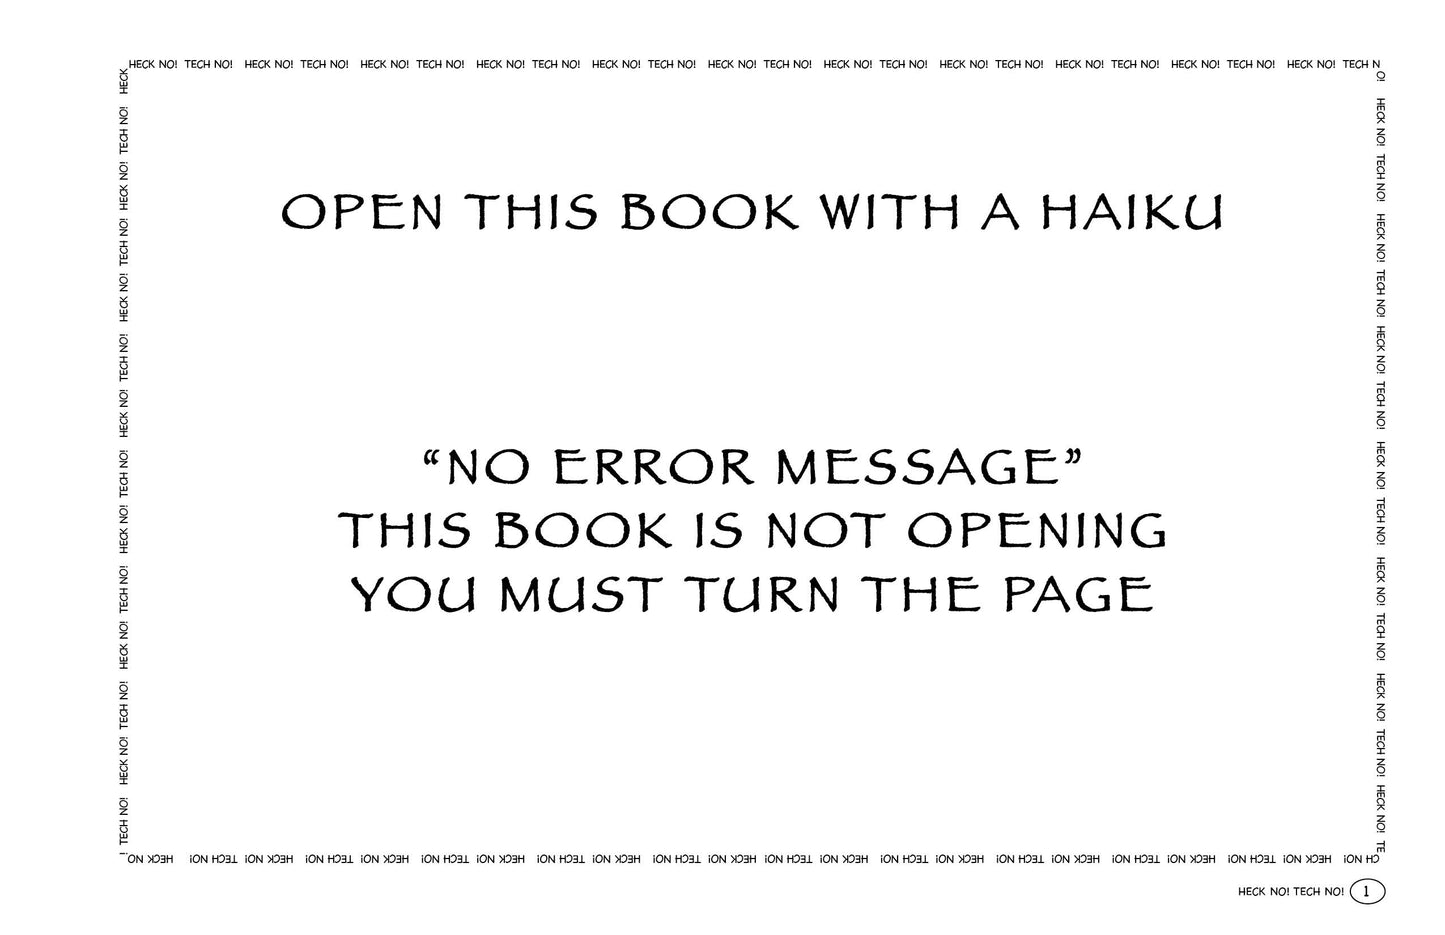 HECK NO! TECH NO! A Humorous Glimpse at the Madness of Technology! - 2nd Edition (Paperback)